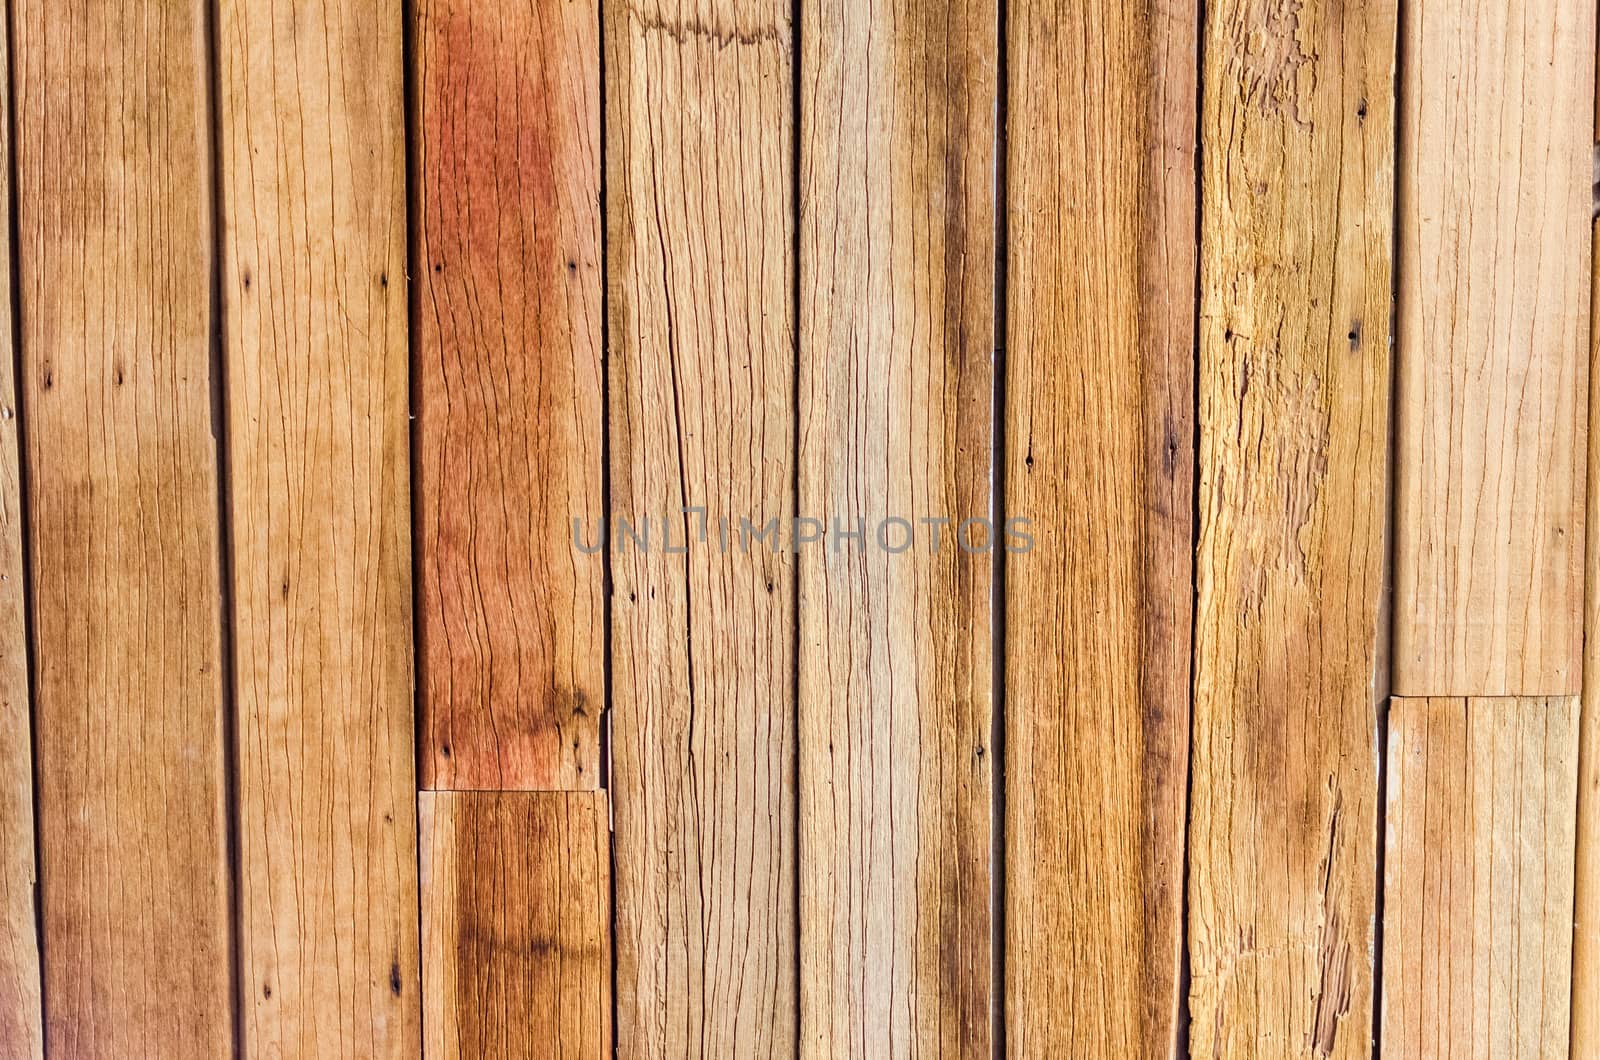 Wood background with knots and nail holes by wanichs